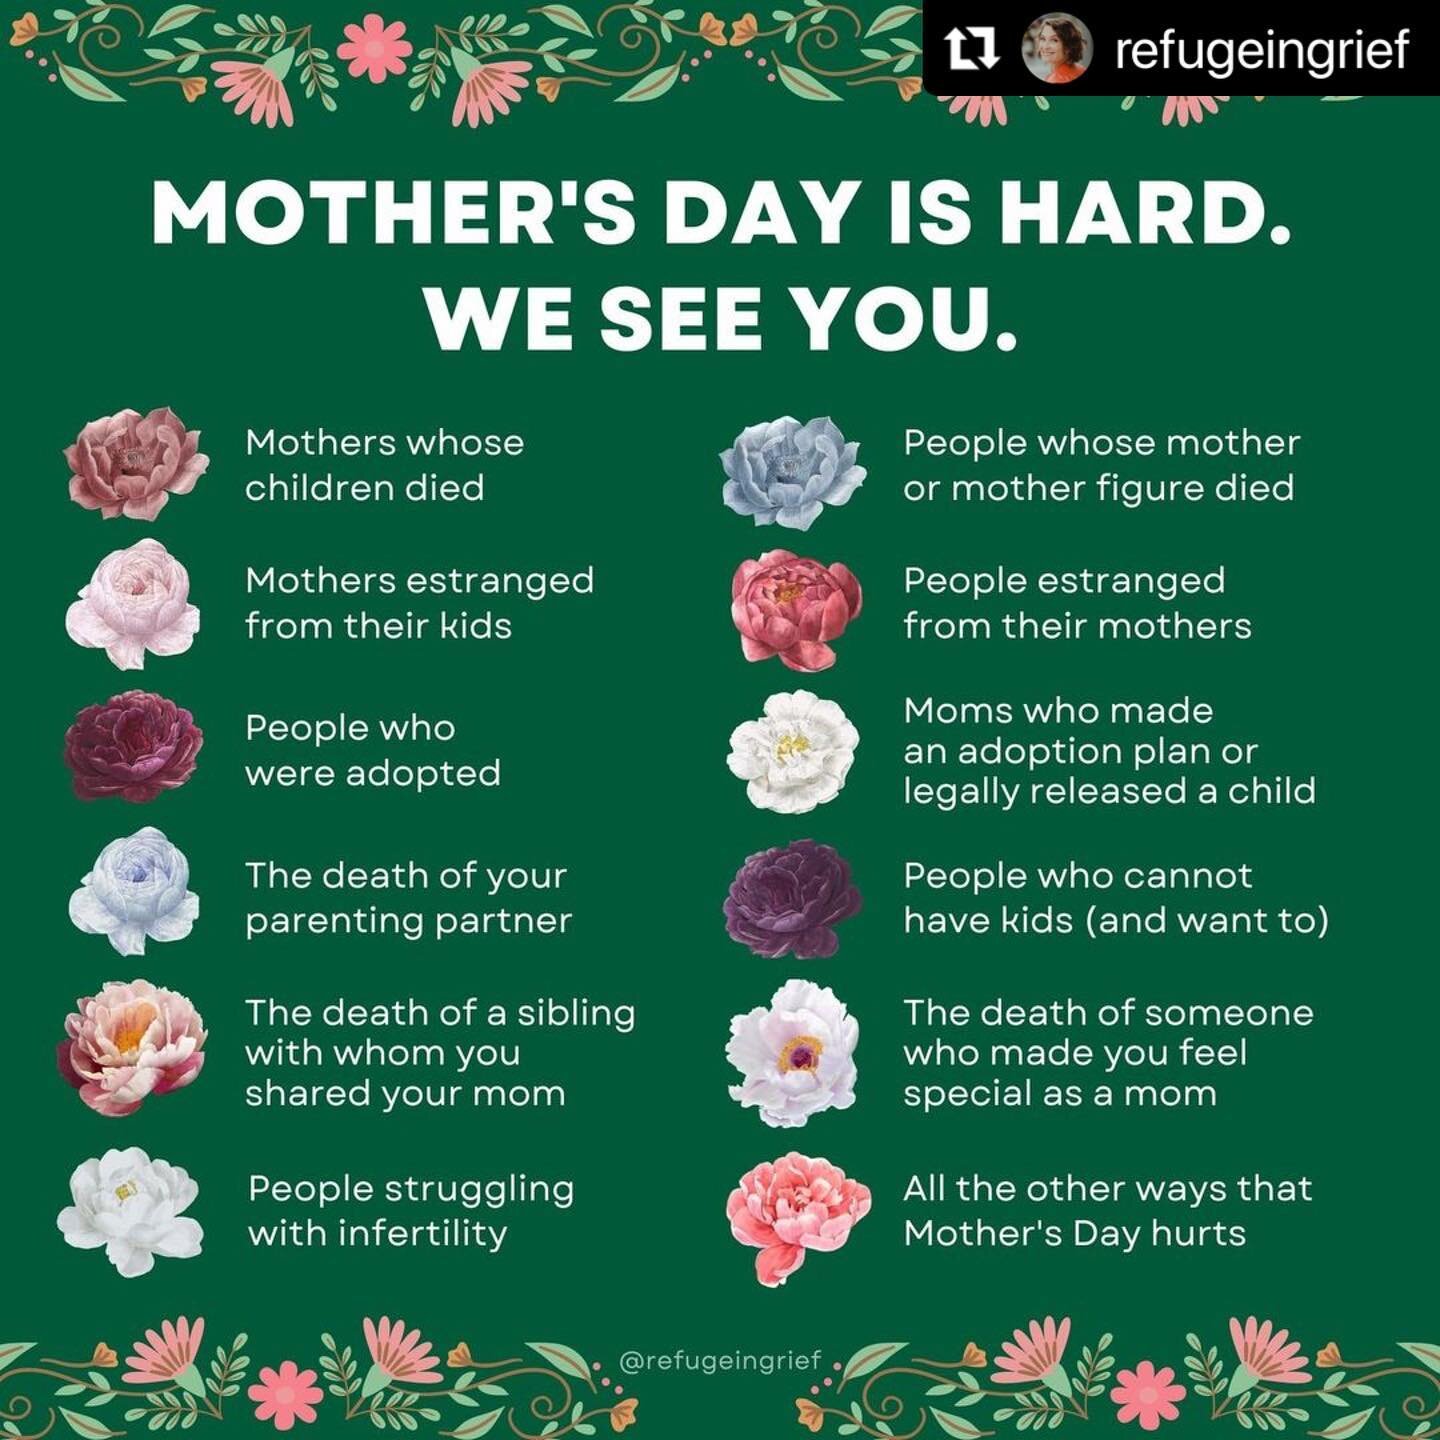 Here in the US (and many other countries around the world), Mother's Day is upon us. We're thinking of all the people for whom this weekend is particularly difficult. The second Sunday in May (and all of the advertising &amp; social media activity ar